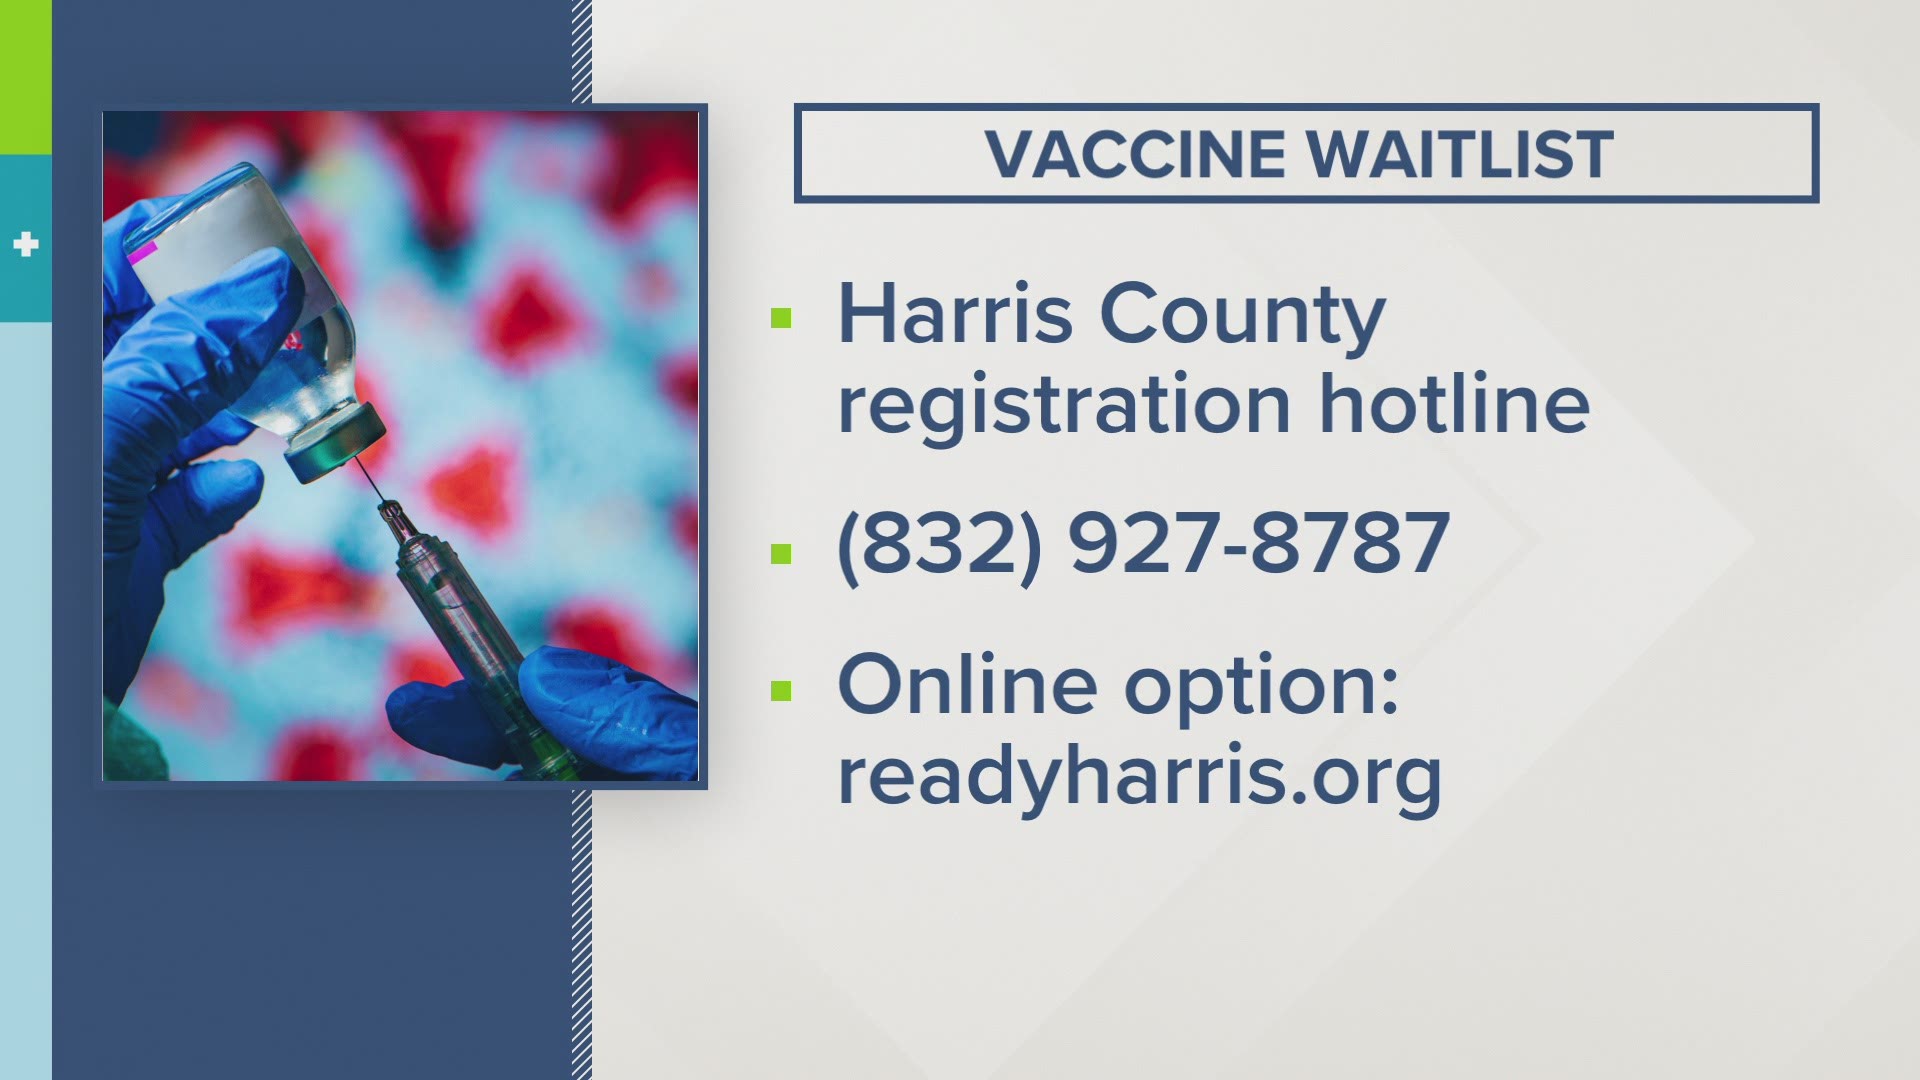 Harris County launched a new COVID-19 vaccination portal Tuesday. After some technical issues, the website was back online Wednesday and taking applications.